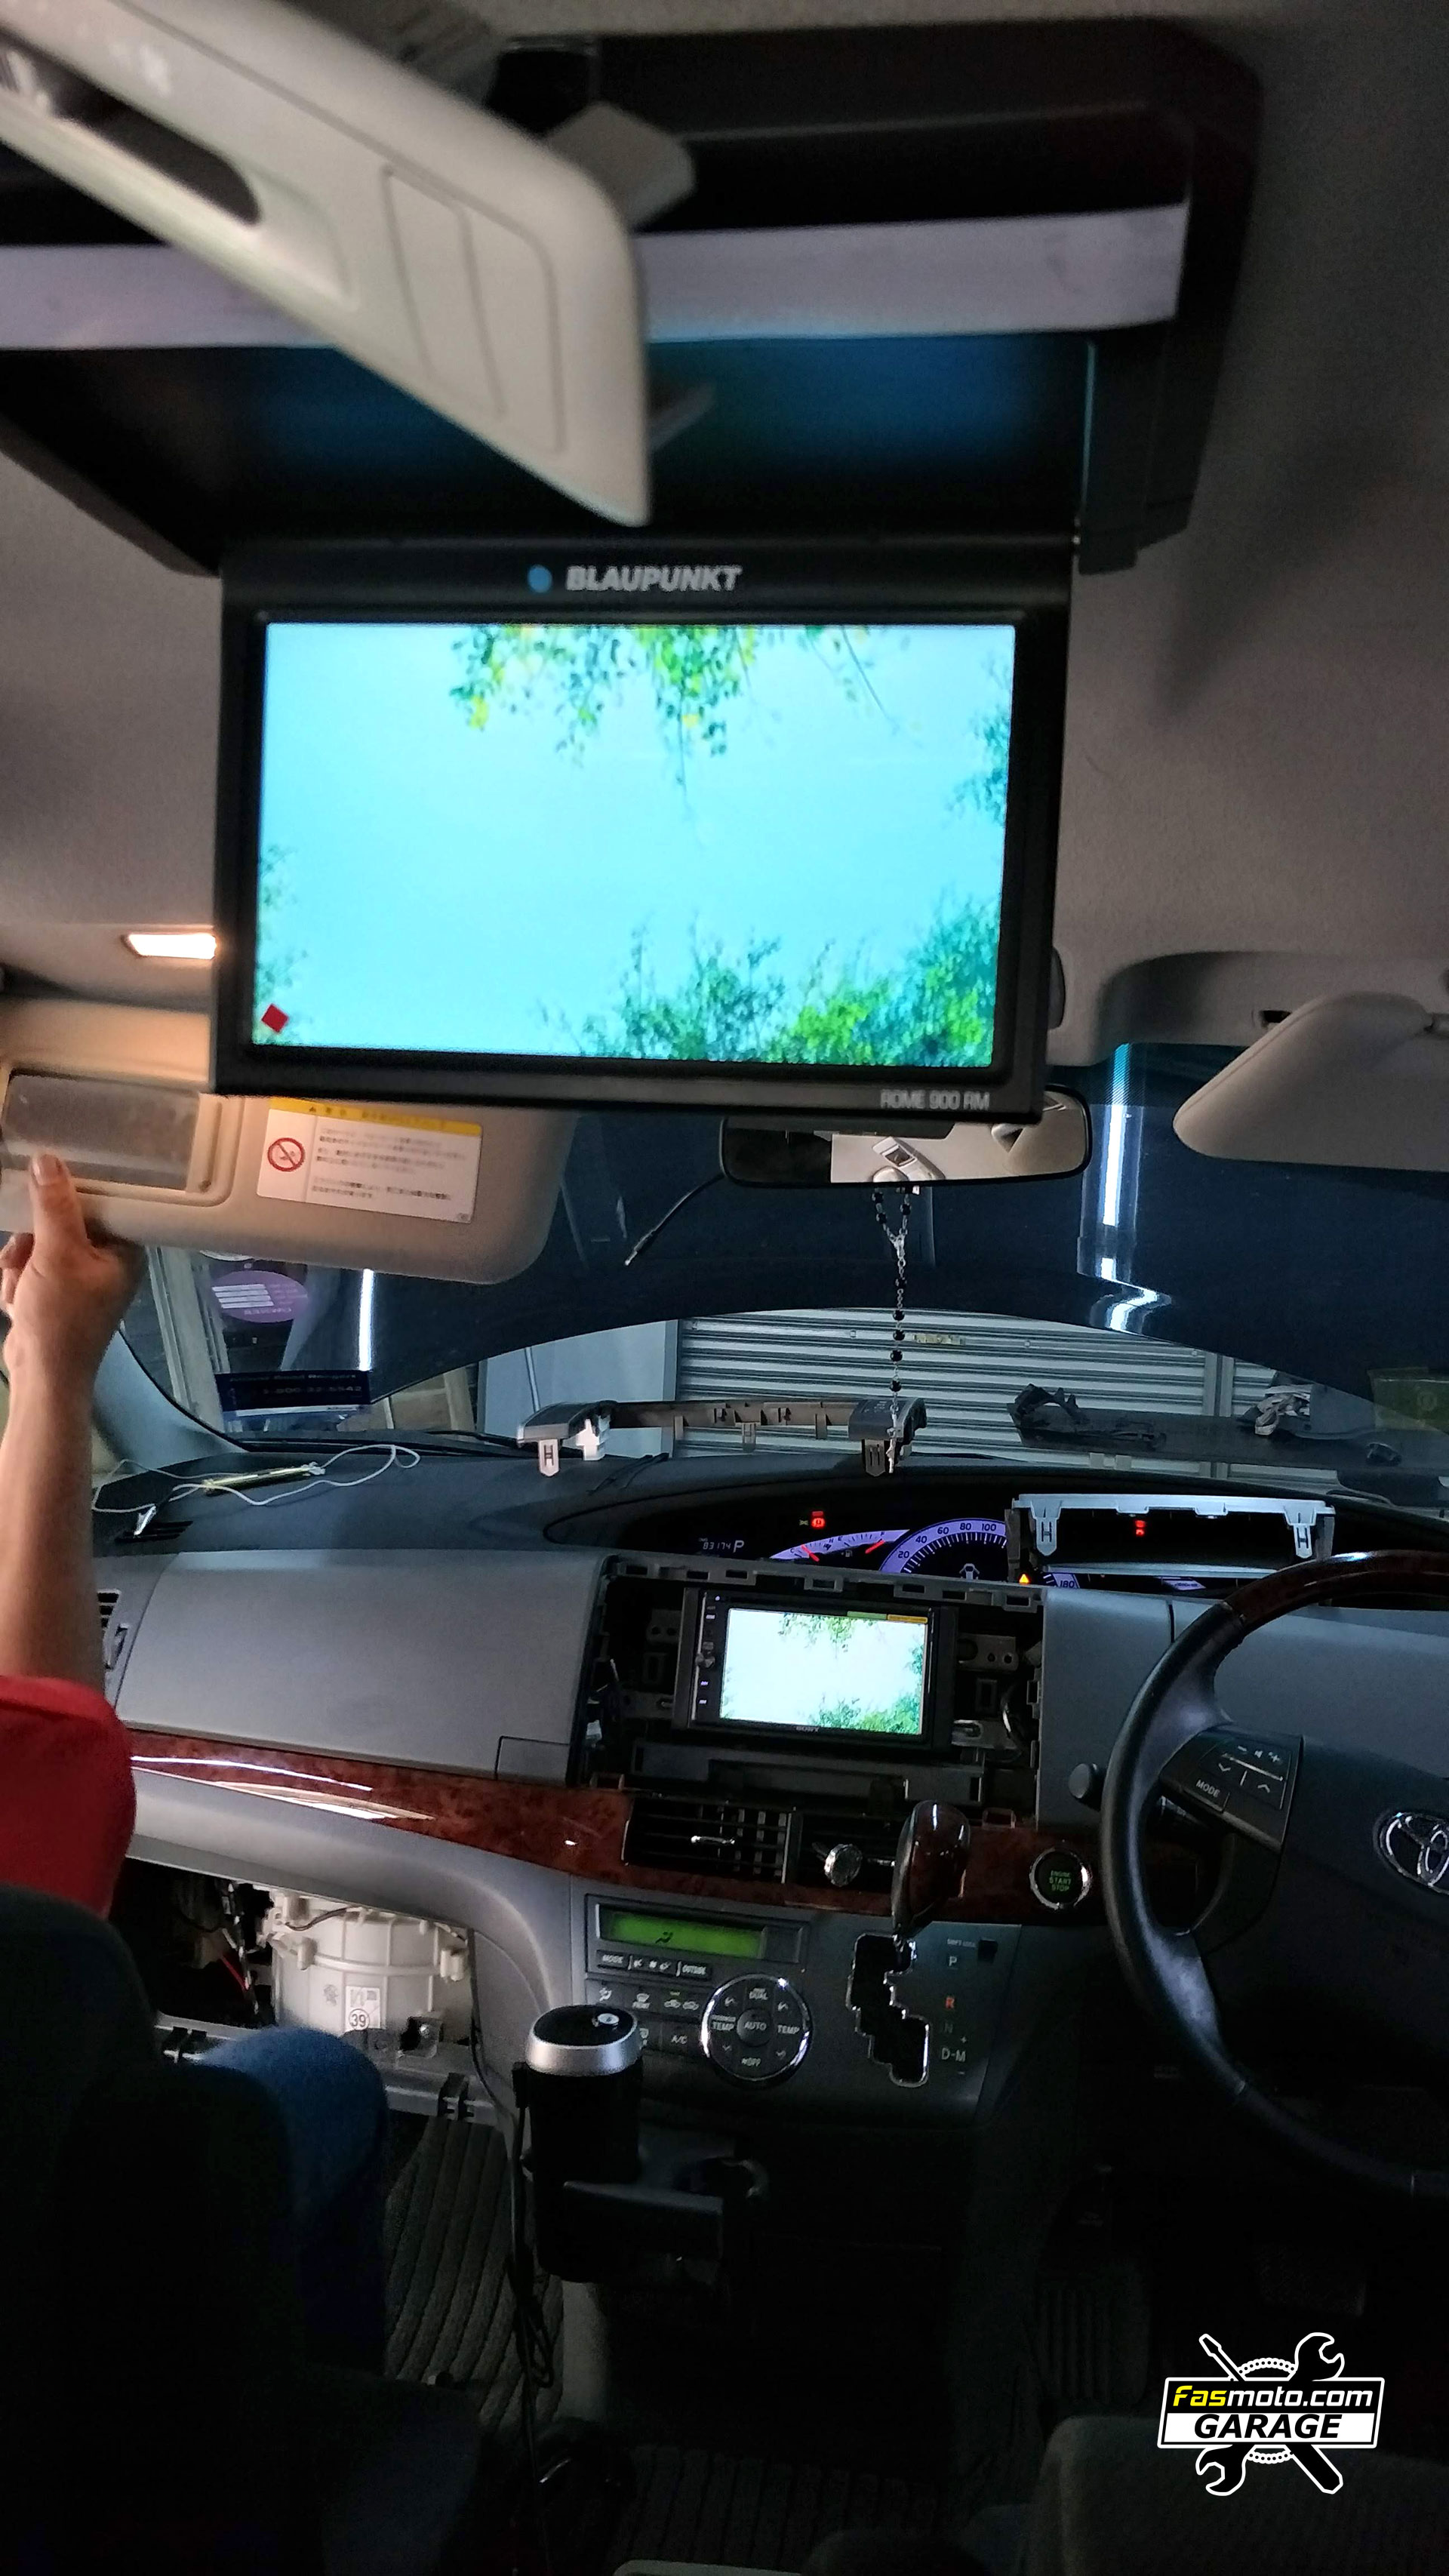 Toyota Estima ACR50 - Overhead Monitors installed and connected